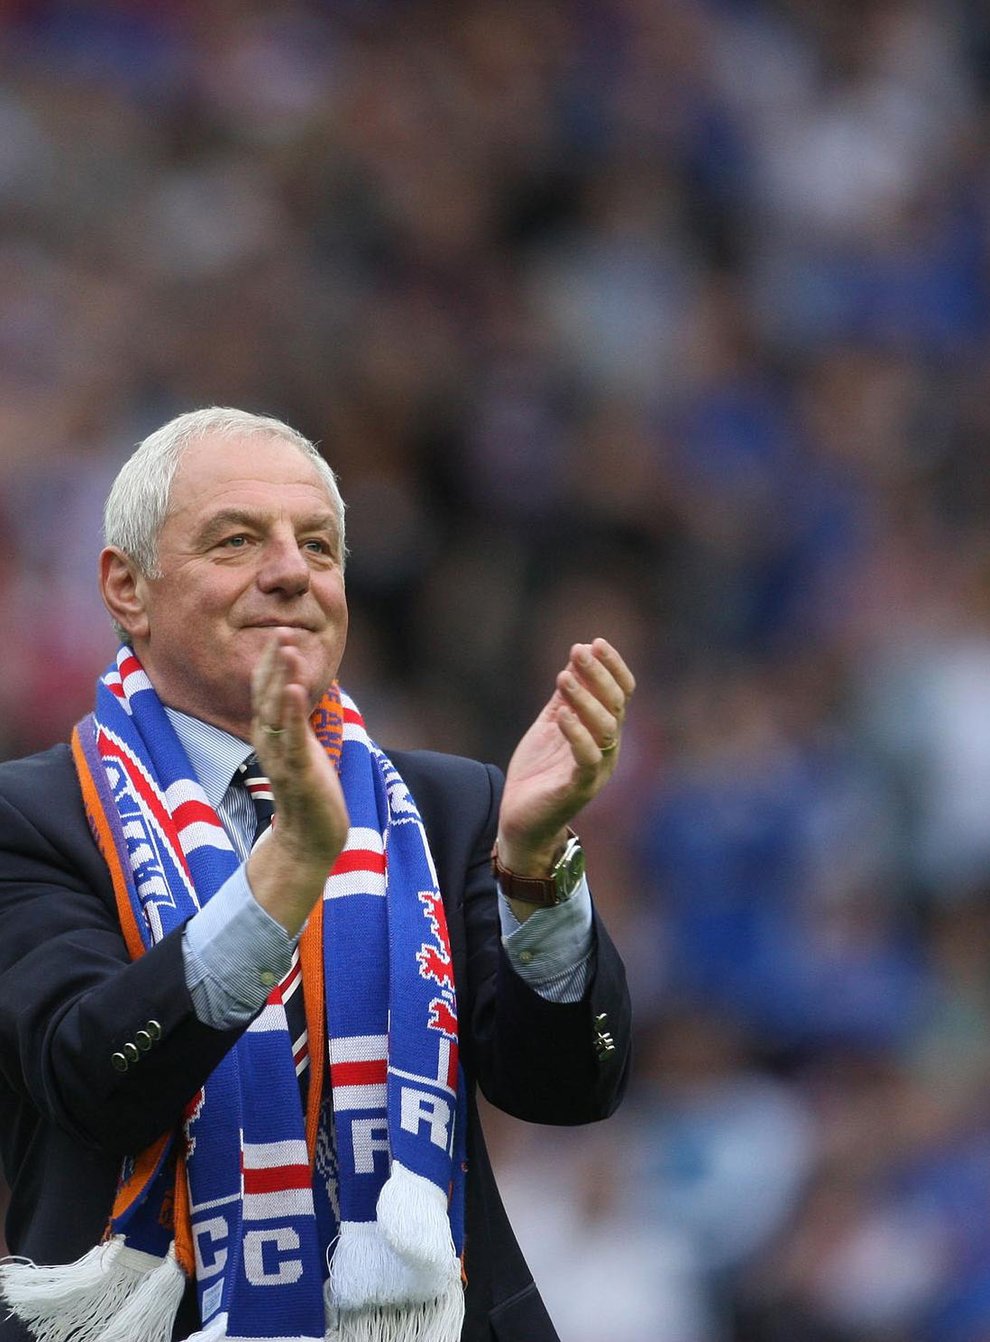 Walter Smith will be remembered as a Rangers great (Lynne Cameron/PA)